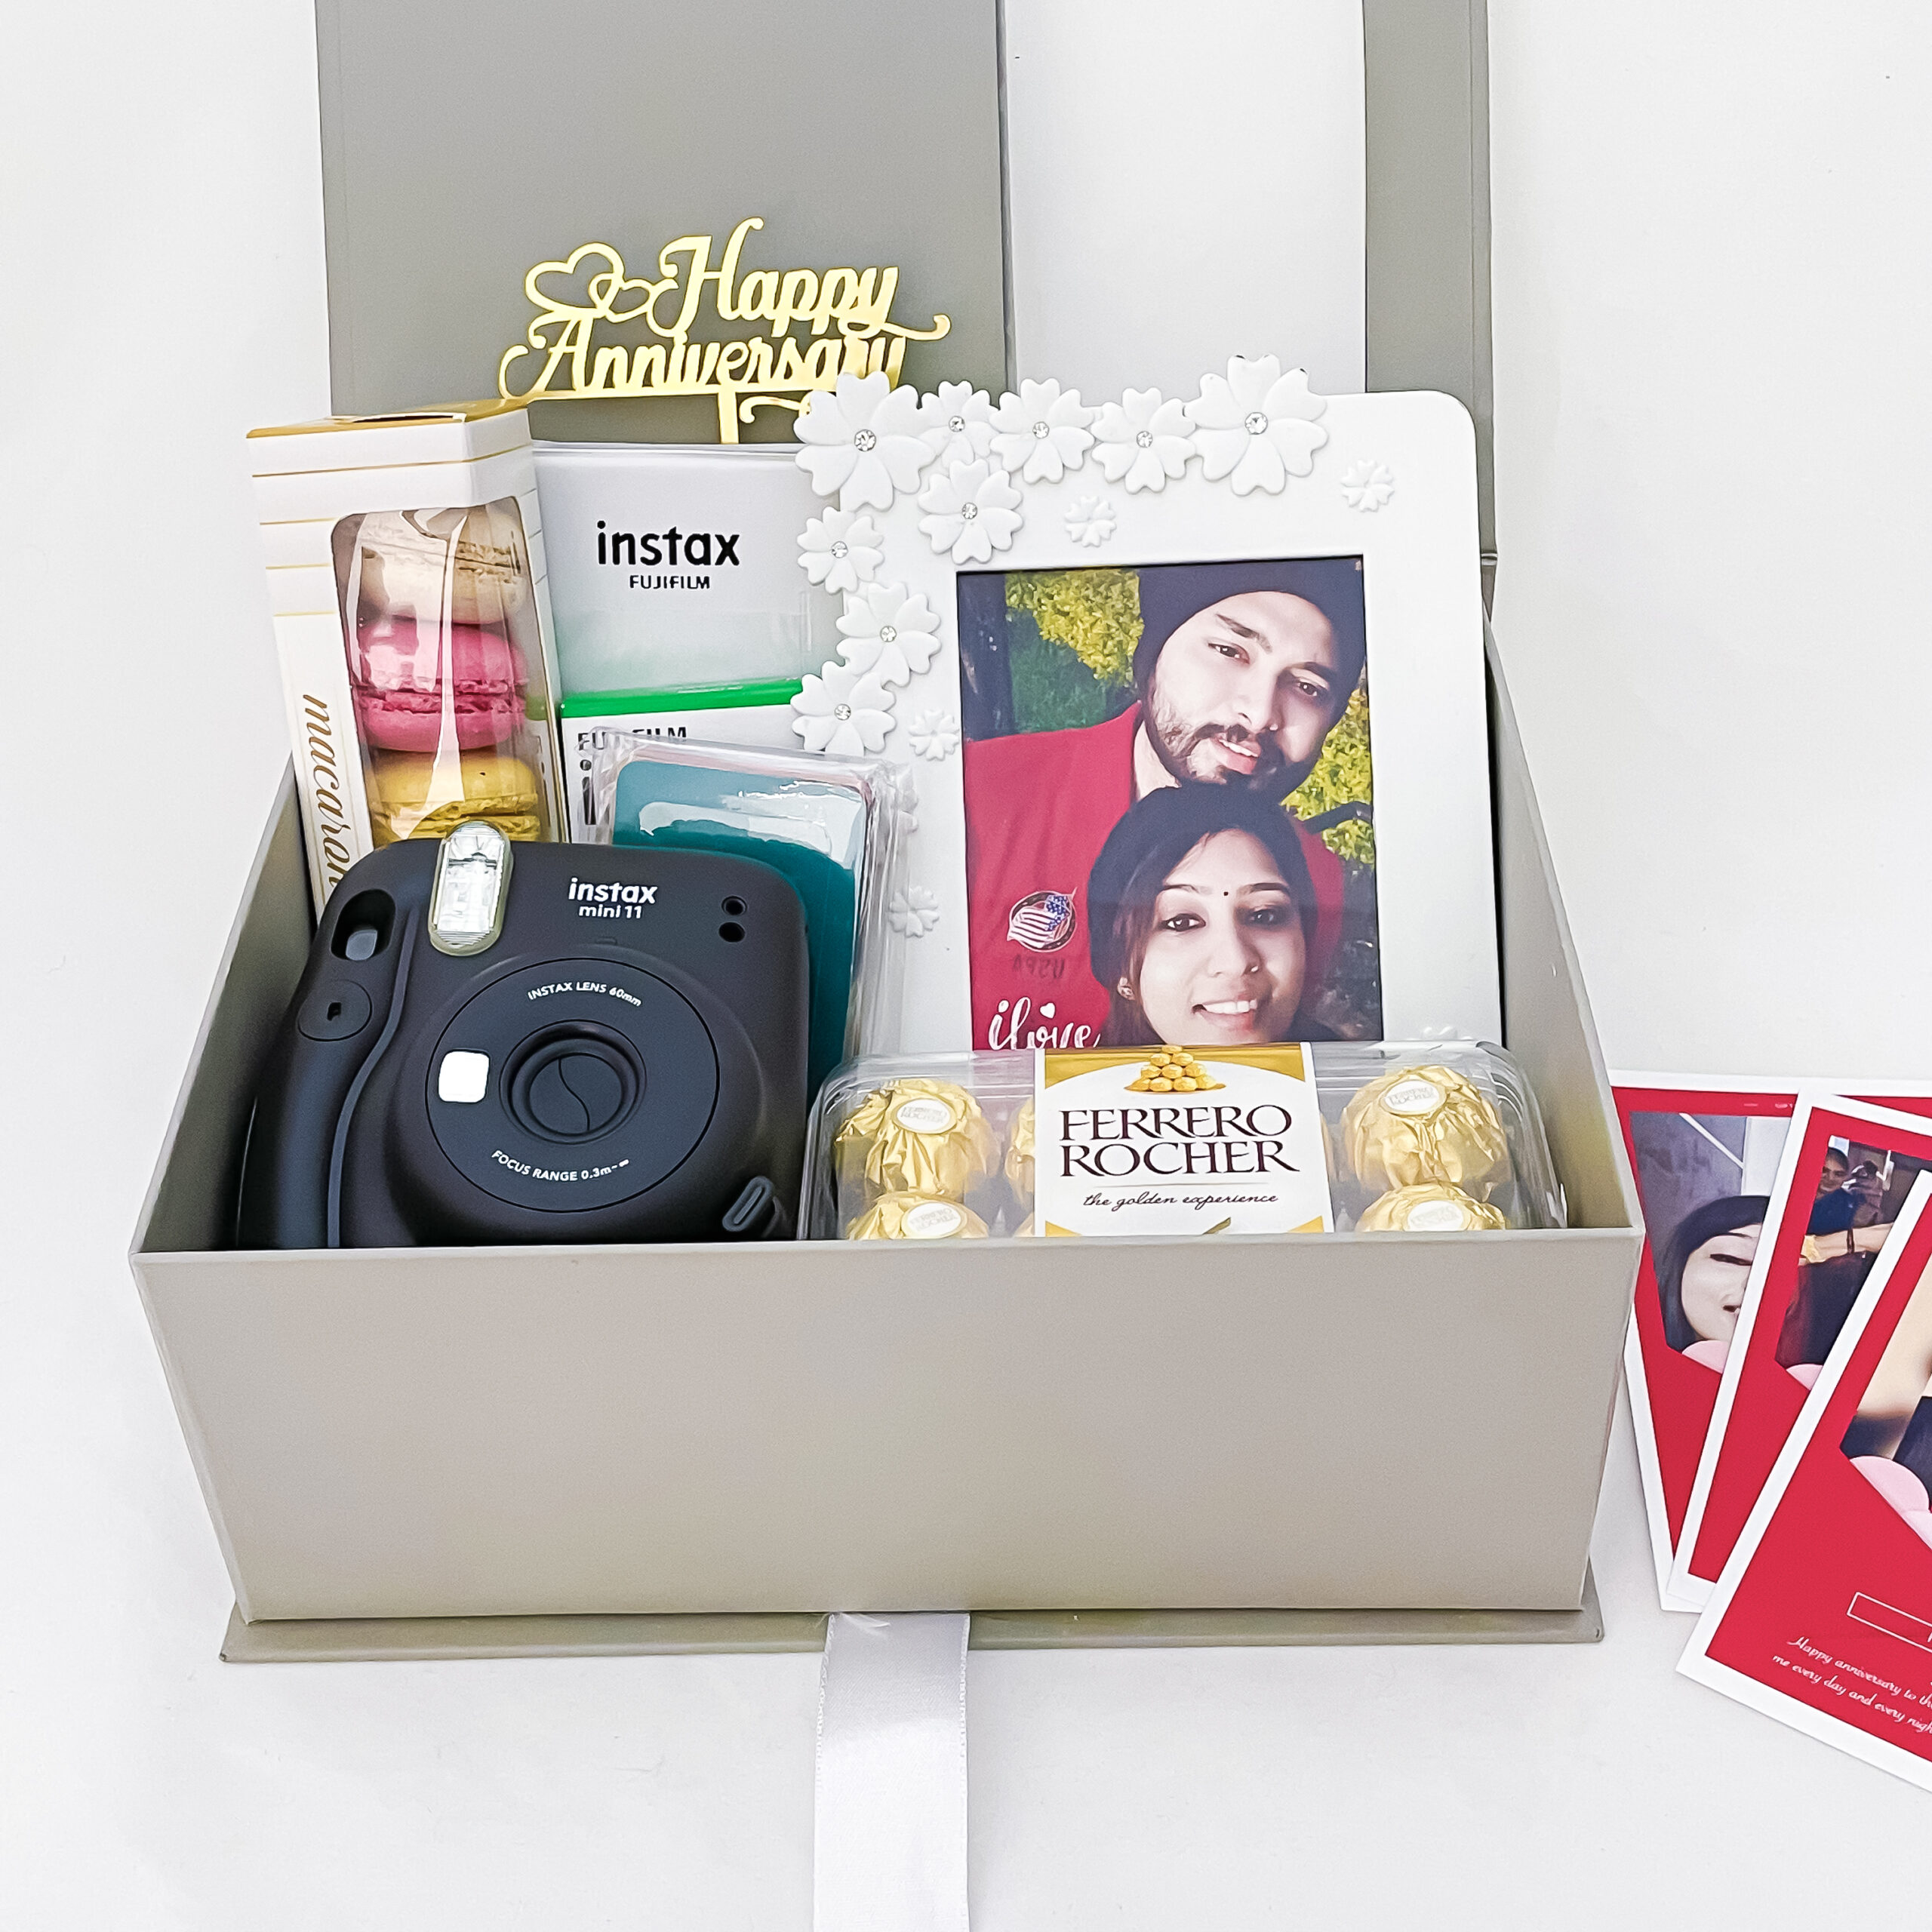 Share more than 201 good anniversary gifts for husband